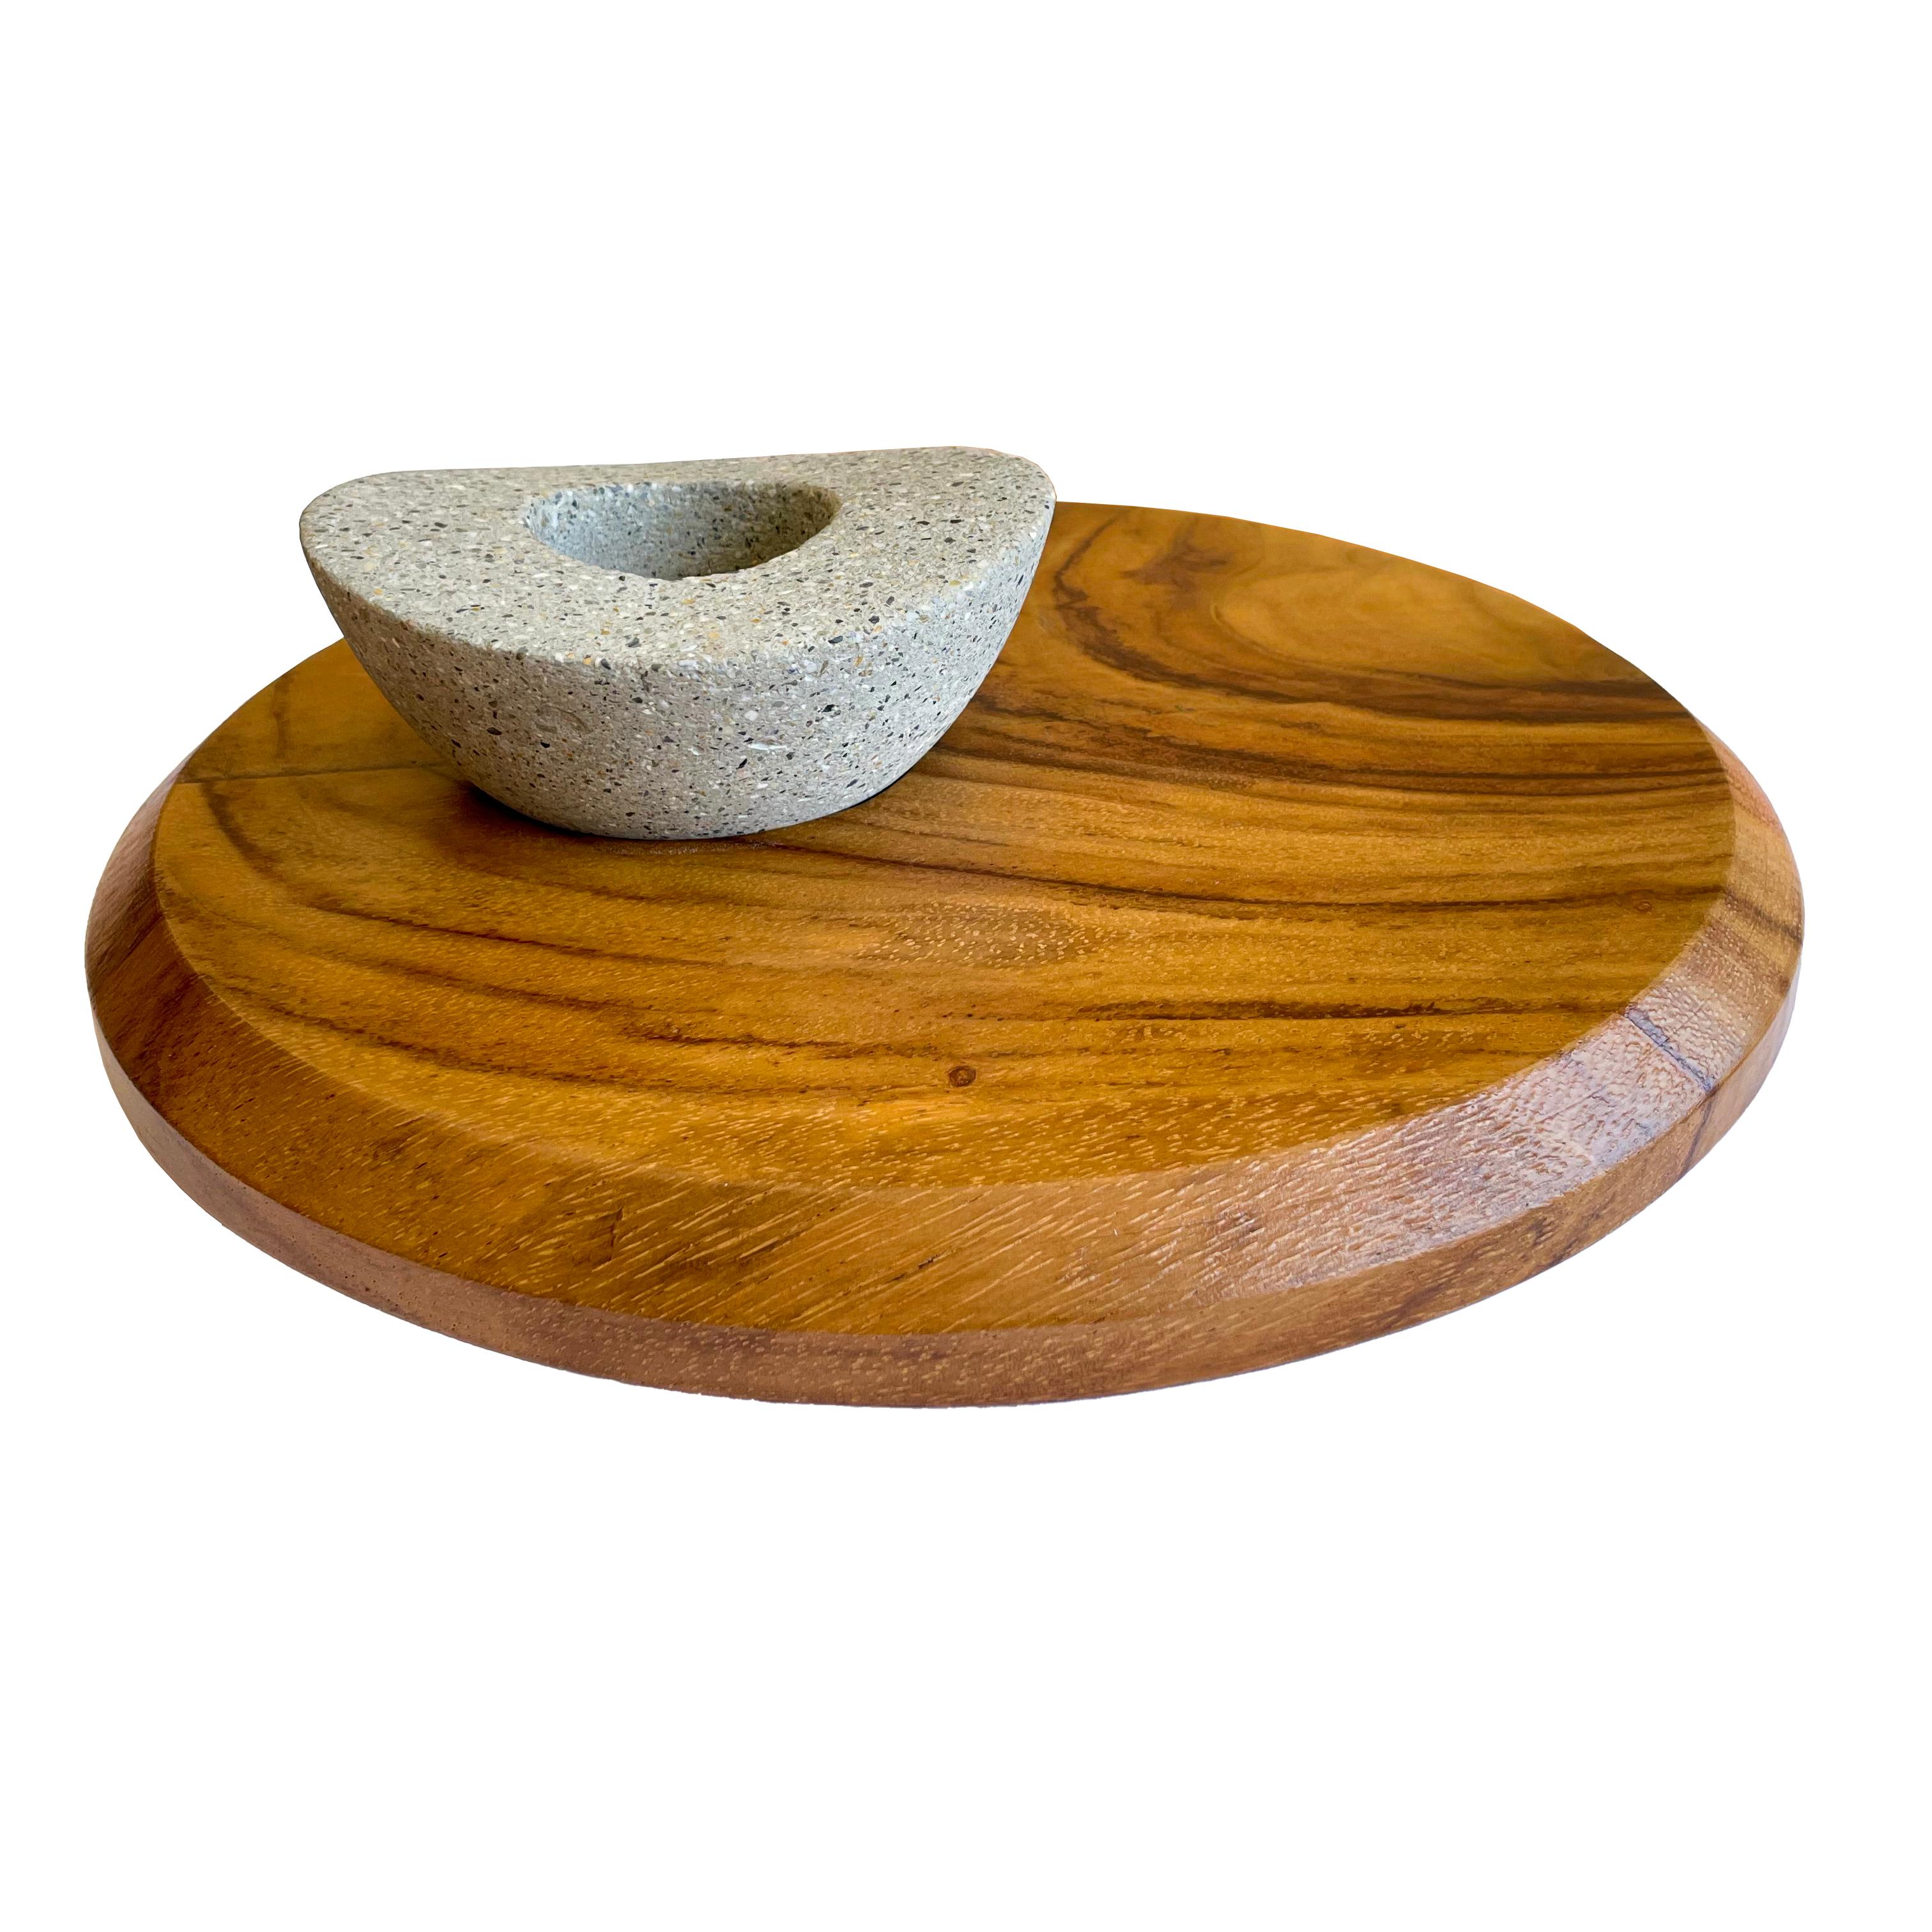 Wood and Concrete tabletop rubbing alcohol fire pit by Pierre Sarkis. The beauty of wood and concrete light up your Table. Solid Wood table of exotic tropical wood and natural Concrete fireplace. Use only 70% or 91% Iso-propyl alcohol as fuel ( Not